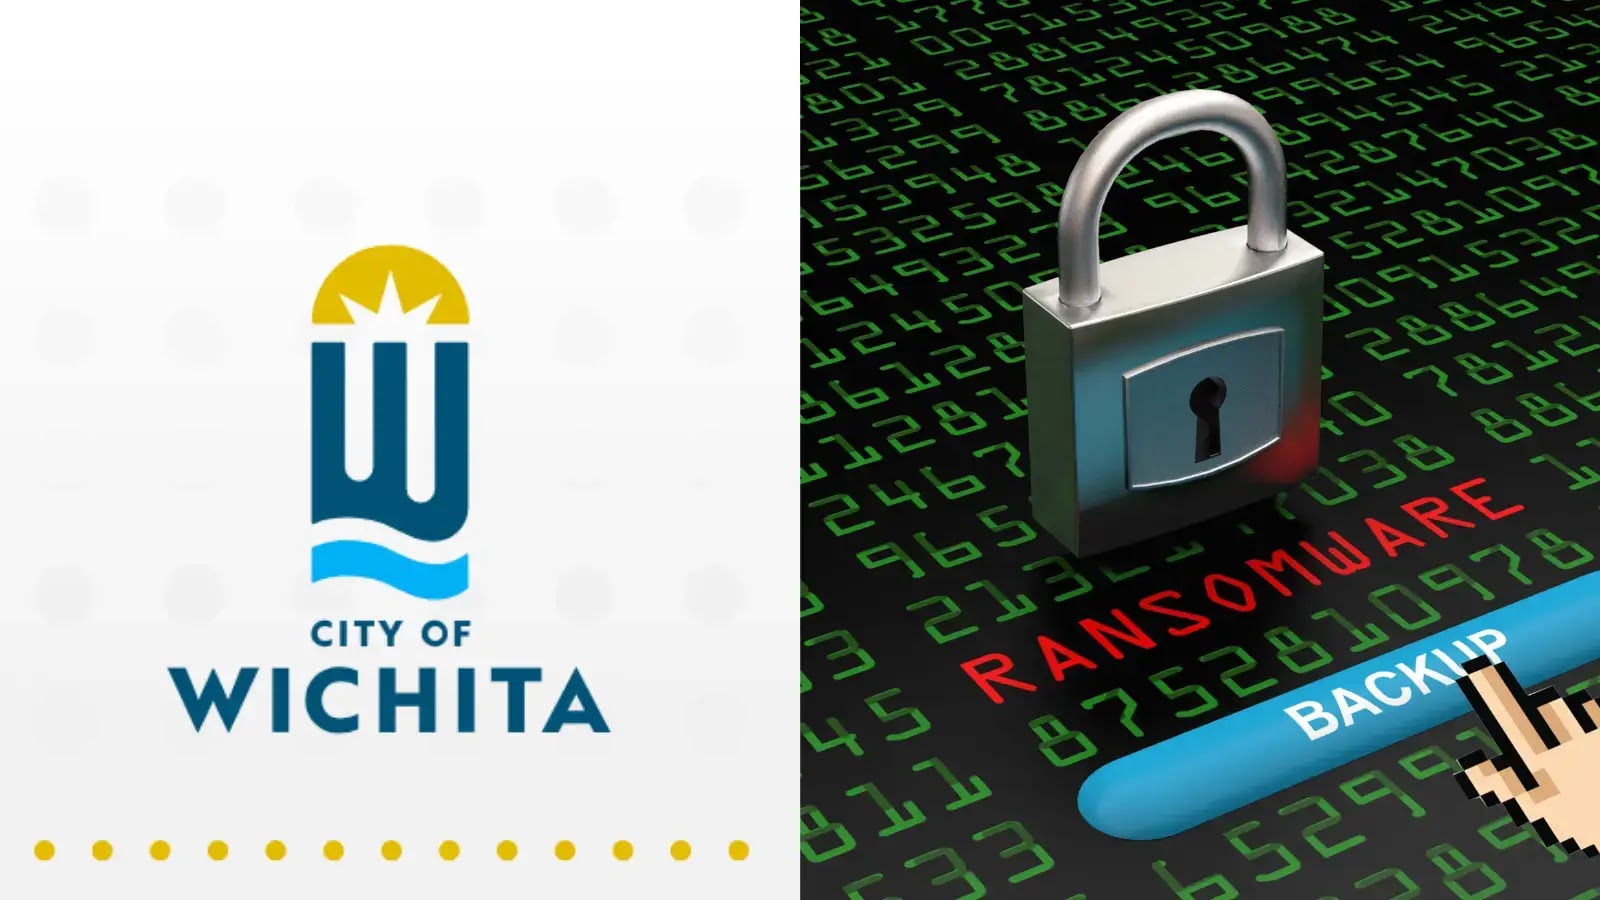 City of Wichita Ransomware Attack: Services Impacted